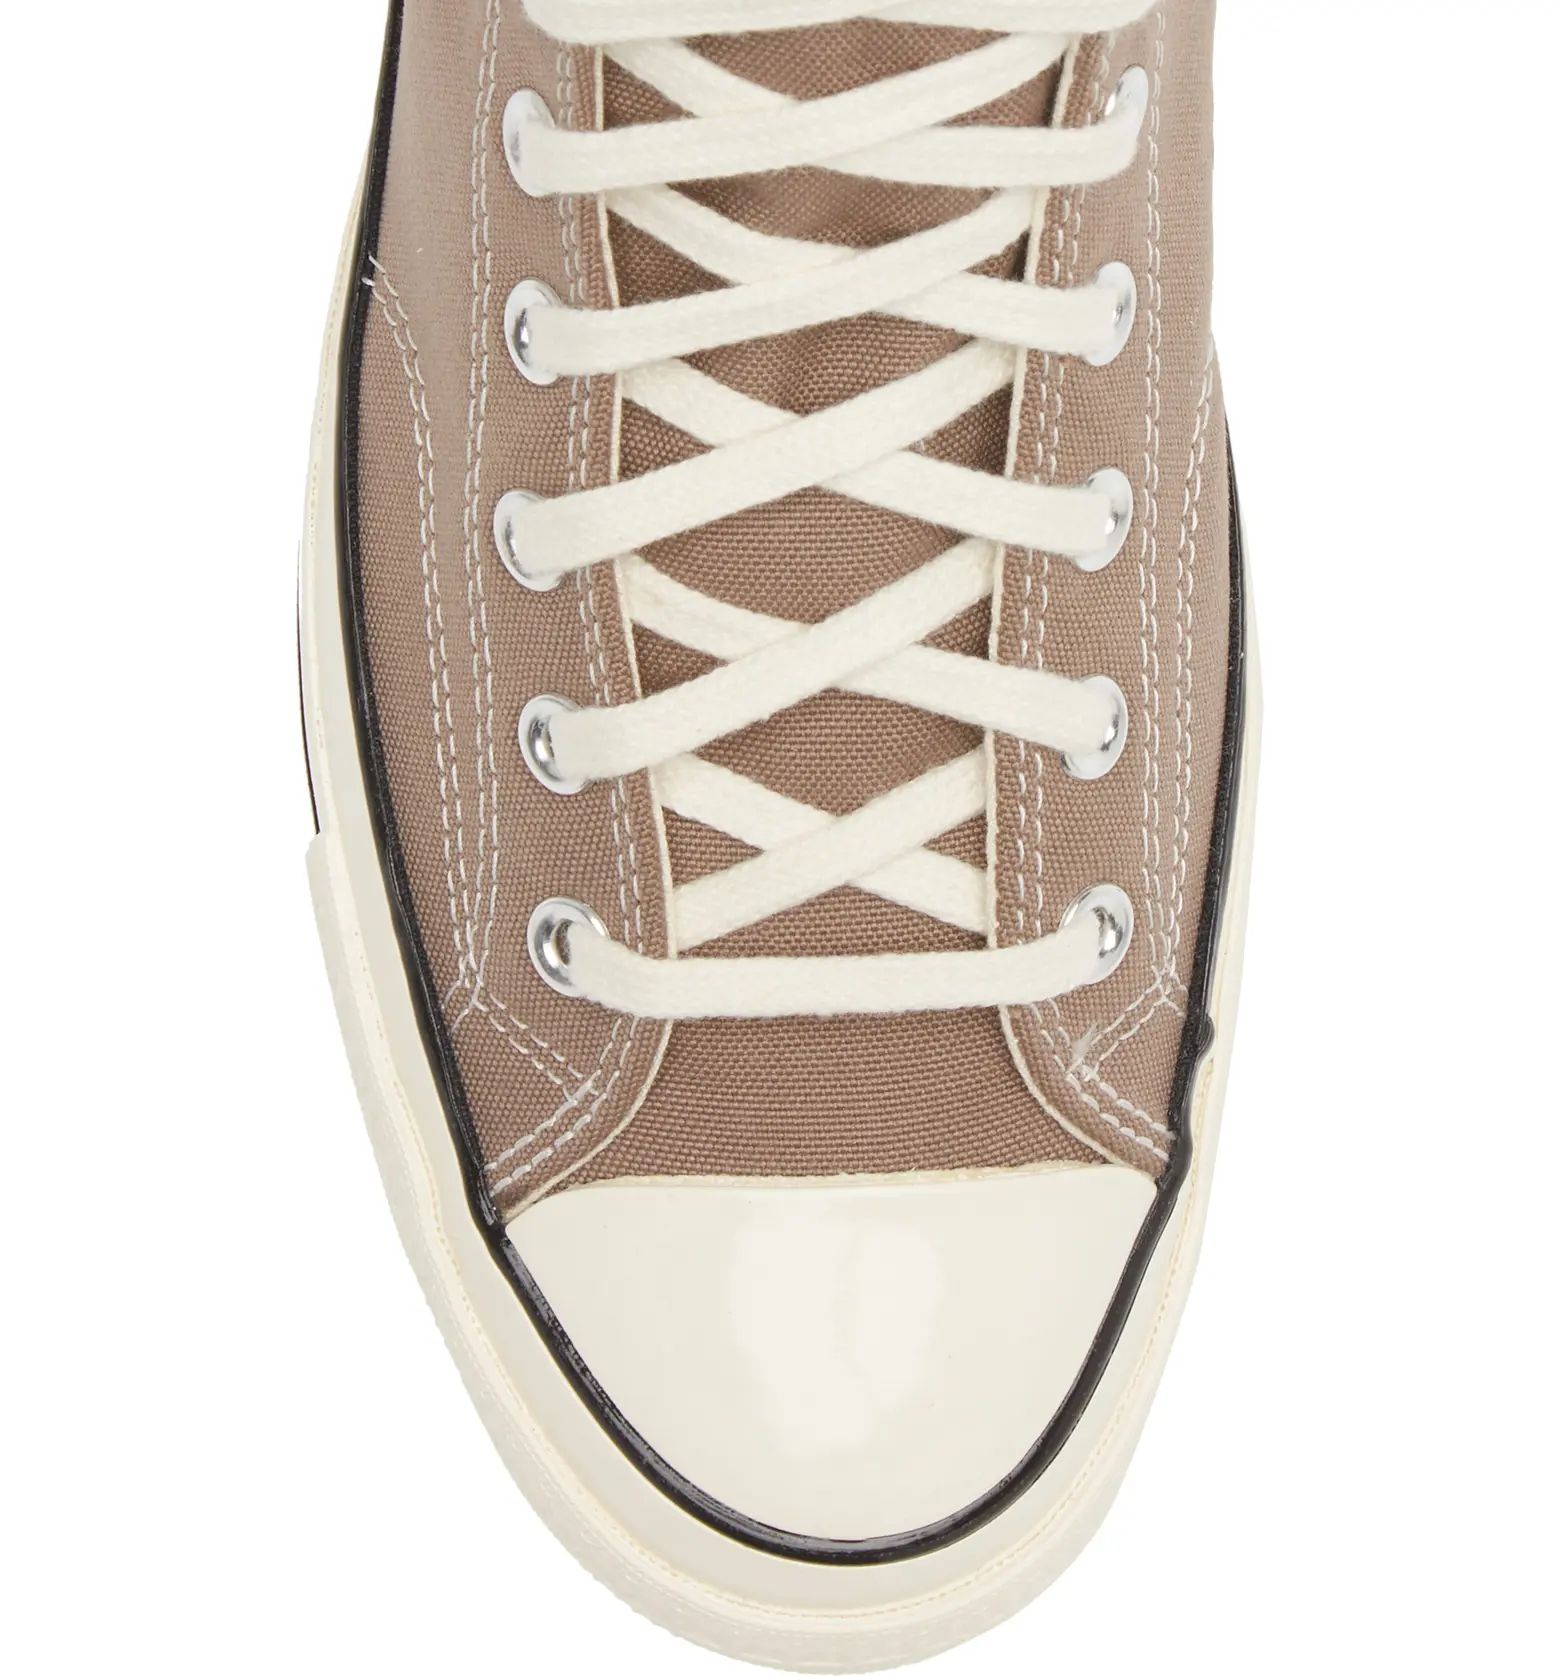 Chuck Taylor® All Star® 70 High Top Sneaker | Nordstrom